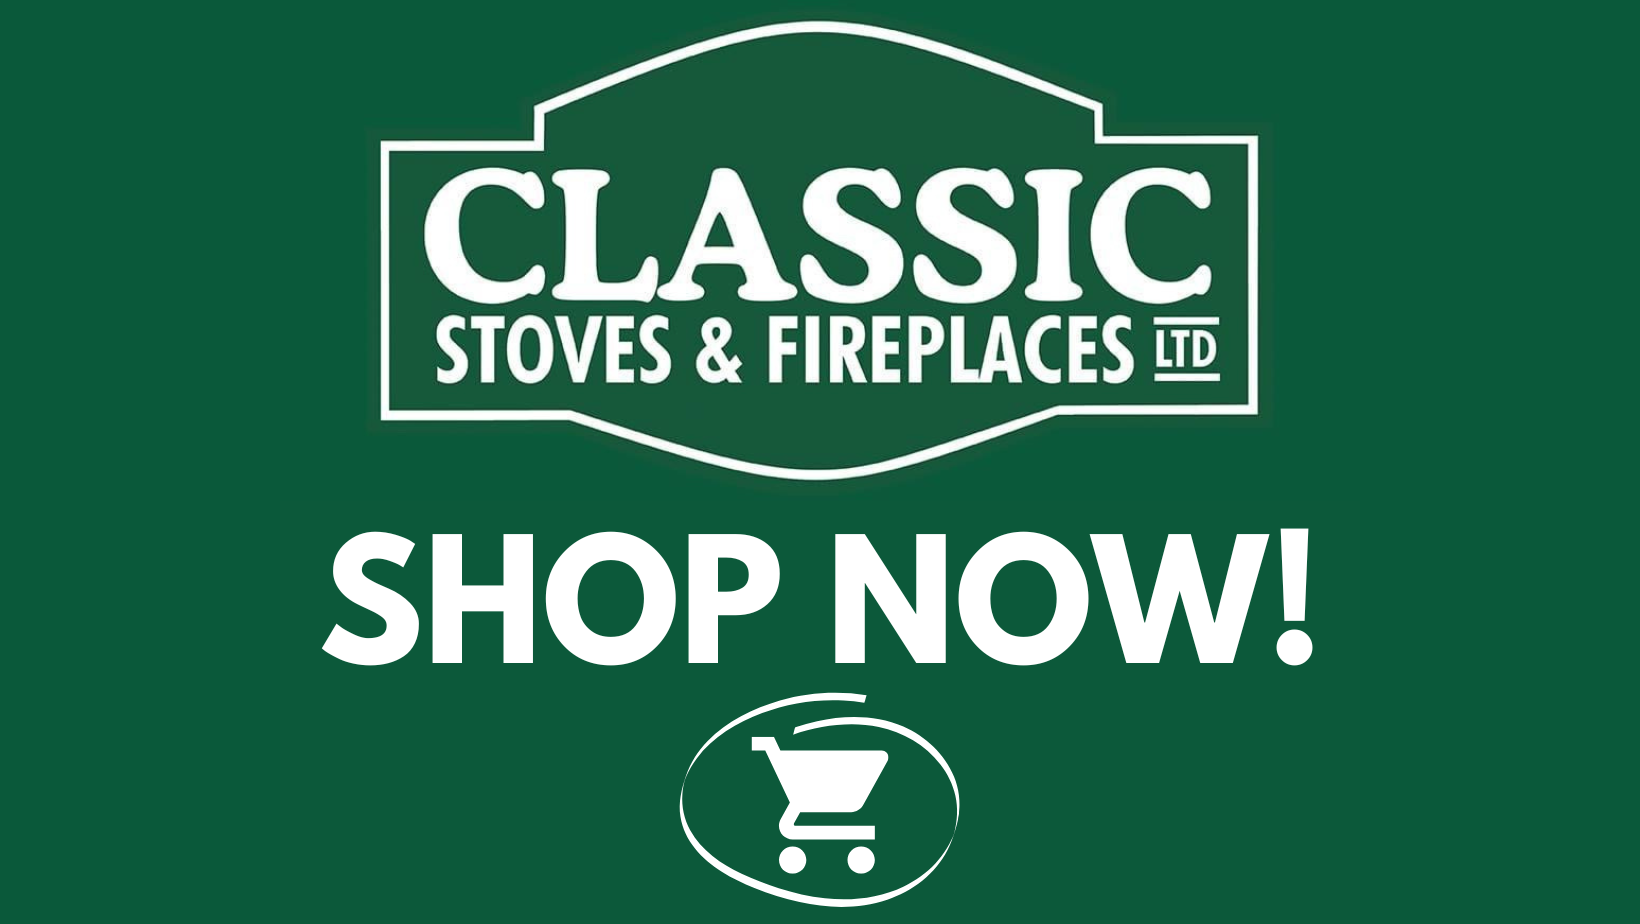 Classic Stoves & Fireplaces Shop Now